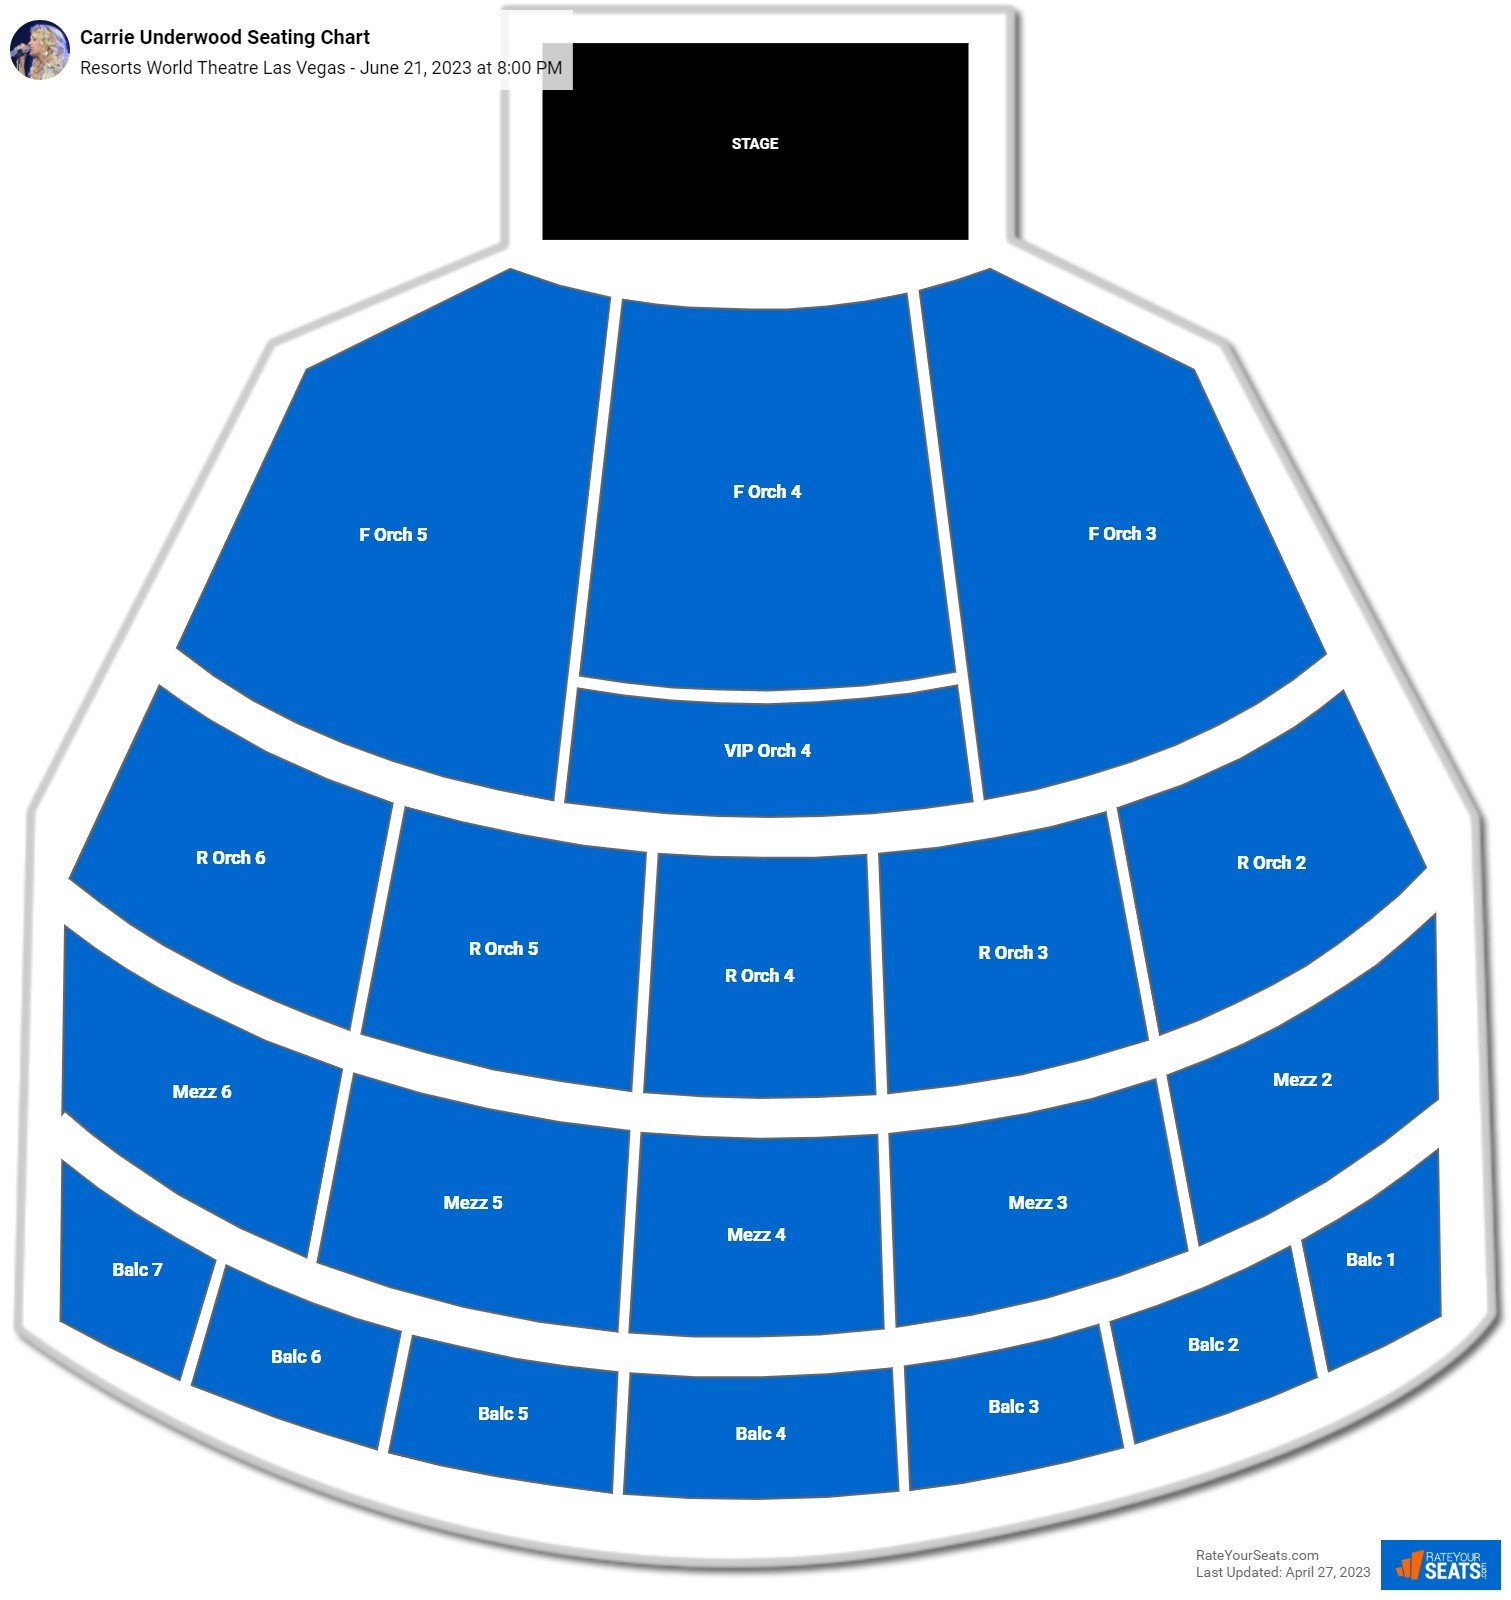 Carrie Underwood Square Garden Seating Chart